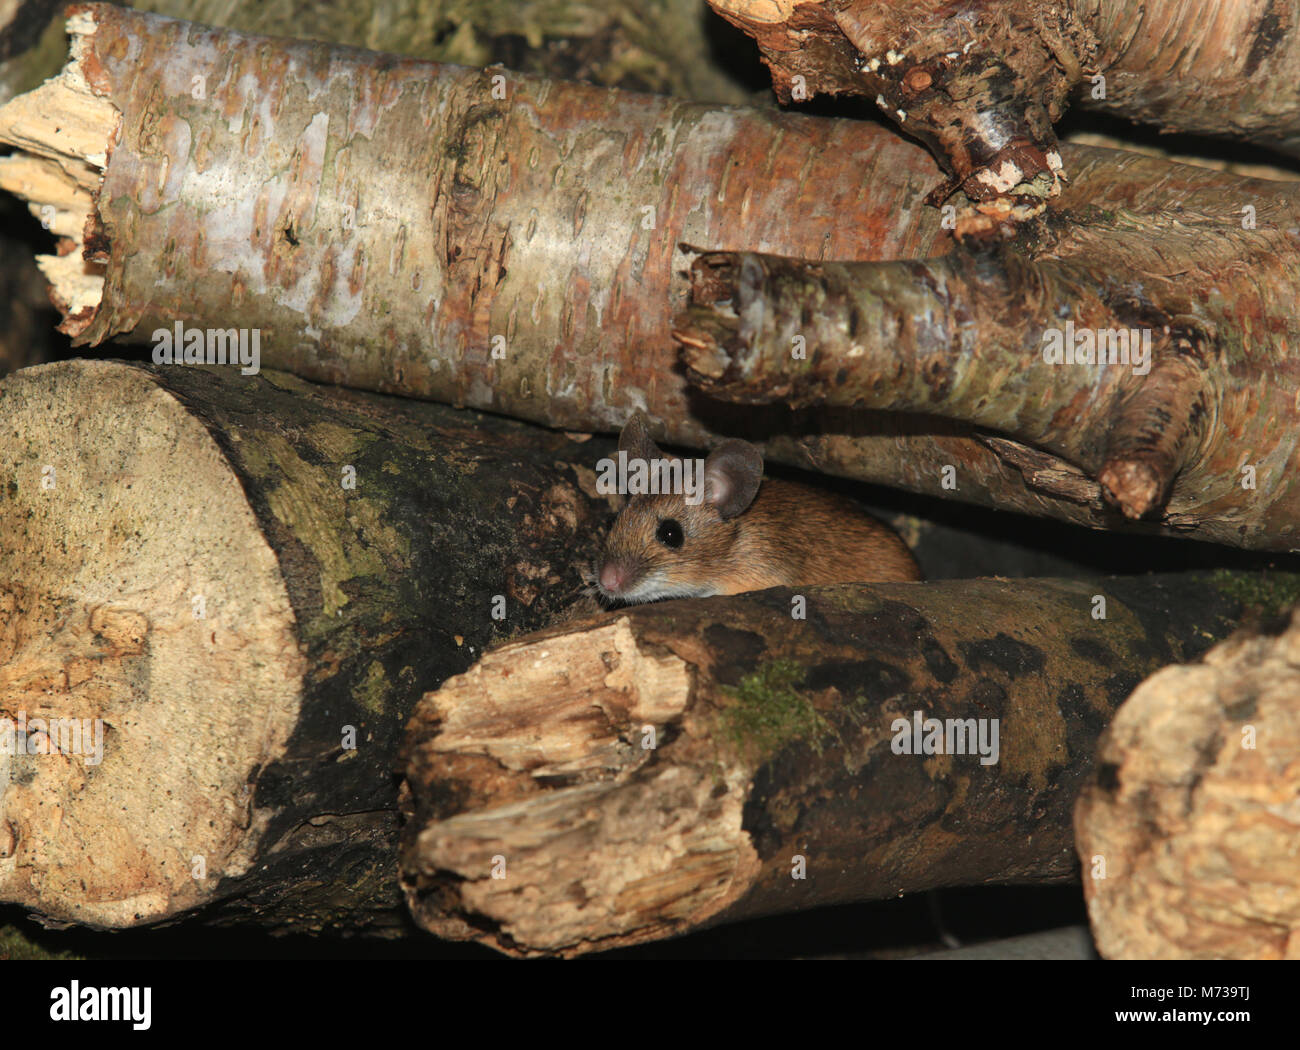 A Wood mouse (Apodemus sylvaticus) hiding in a wood pile in an English garden in winter. Stock Photo